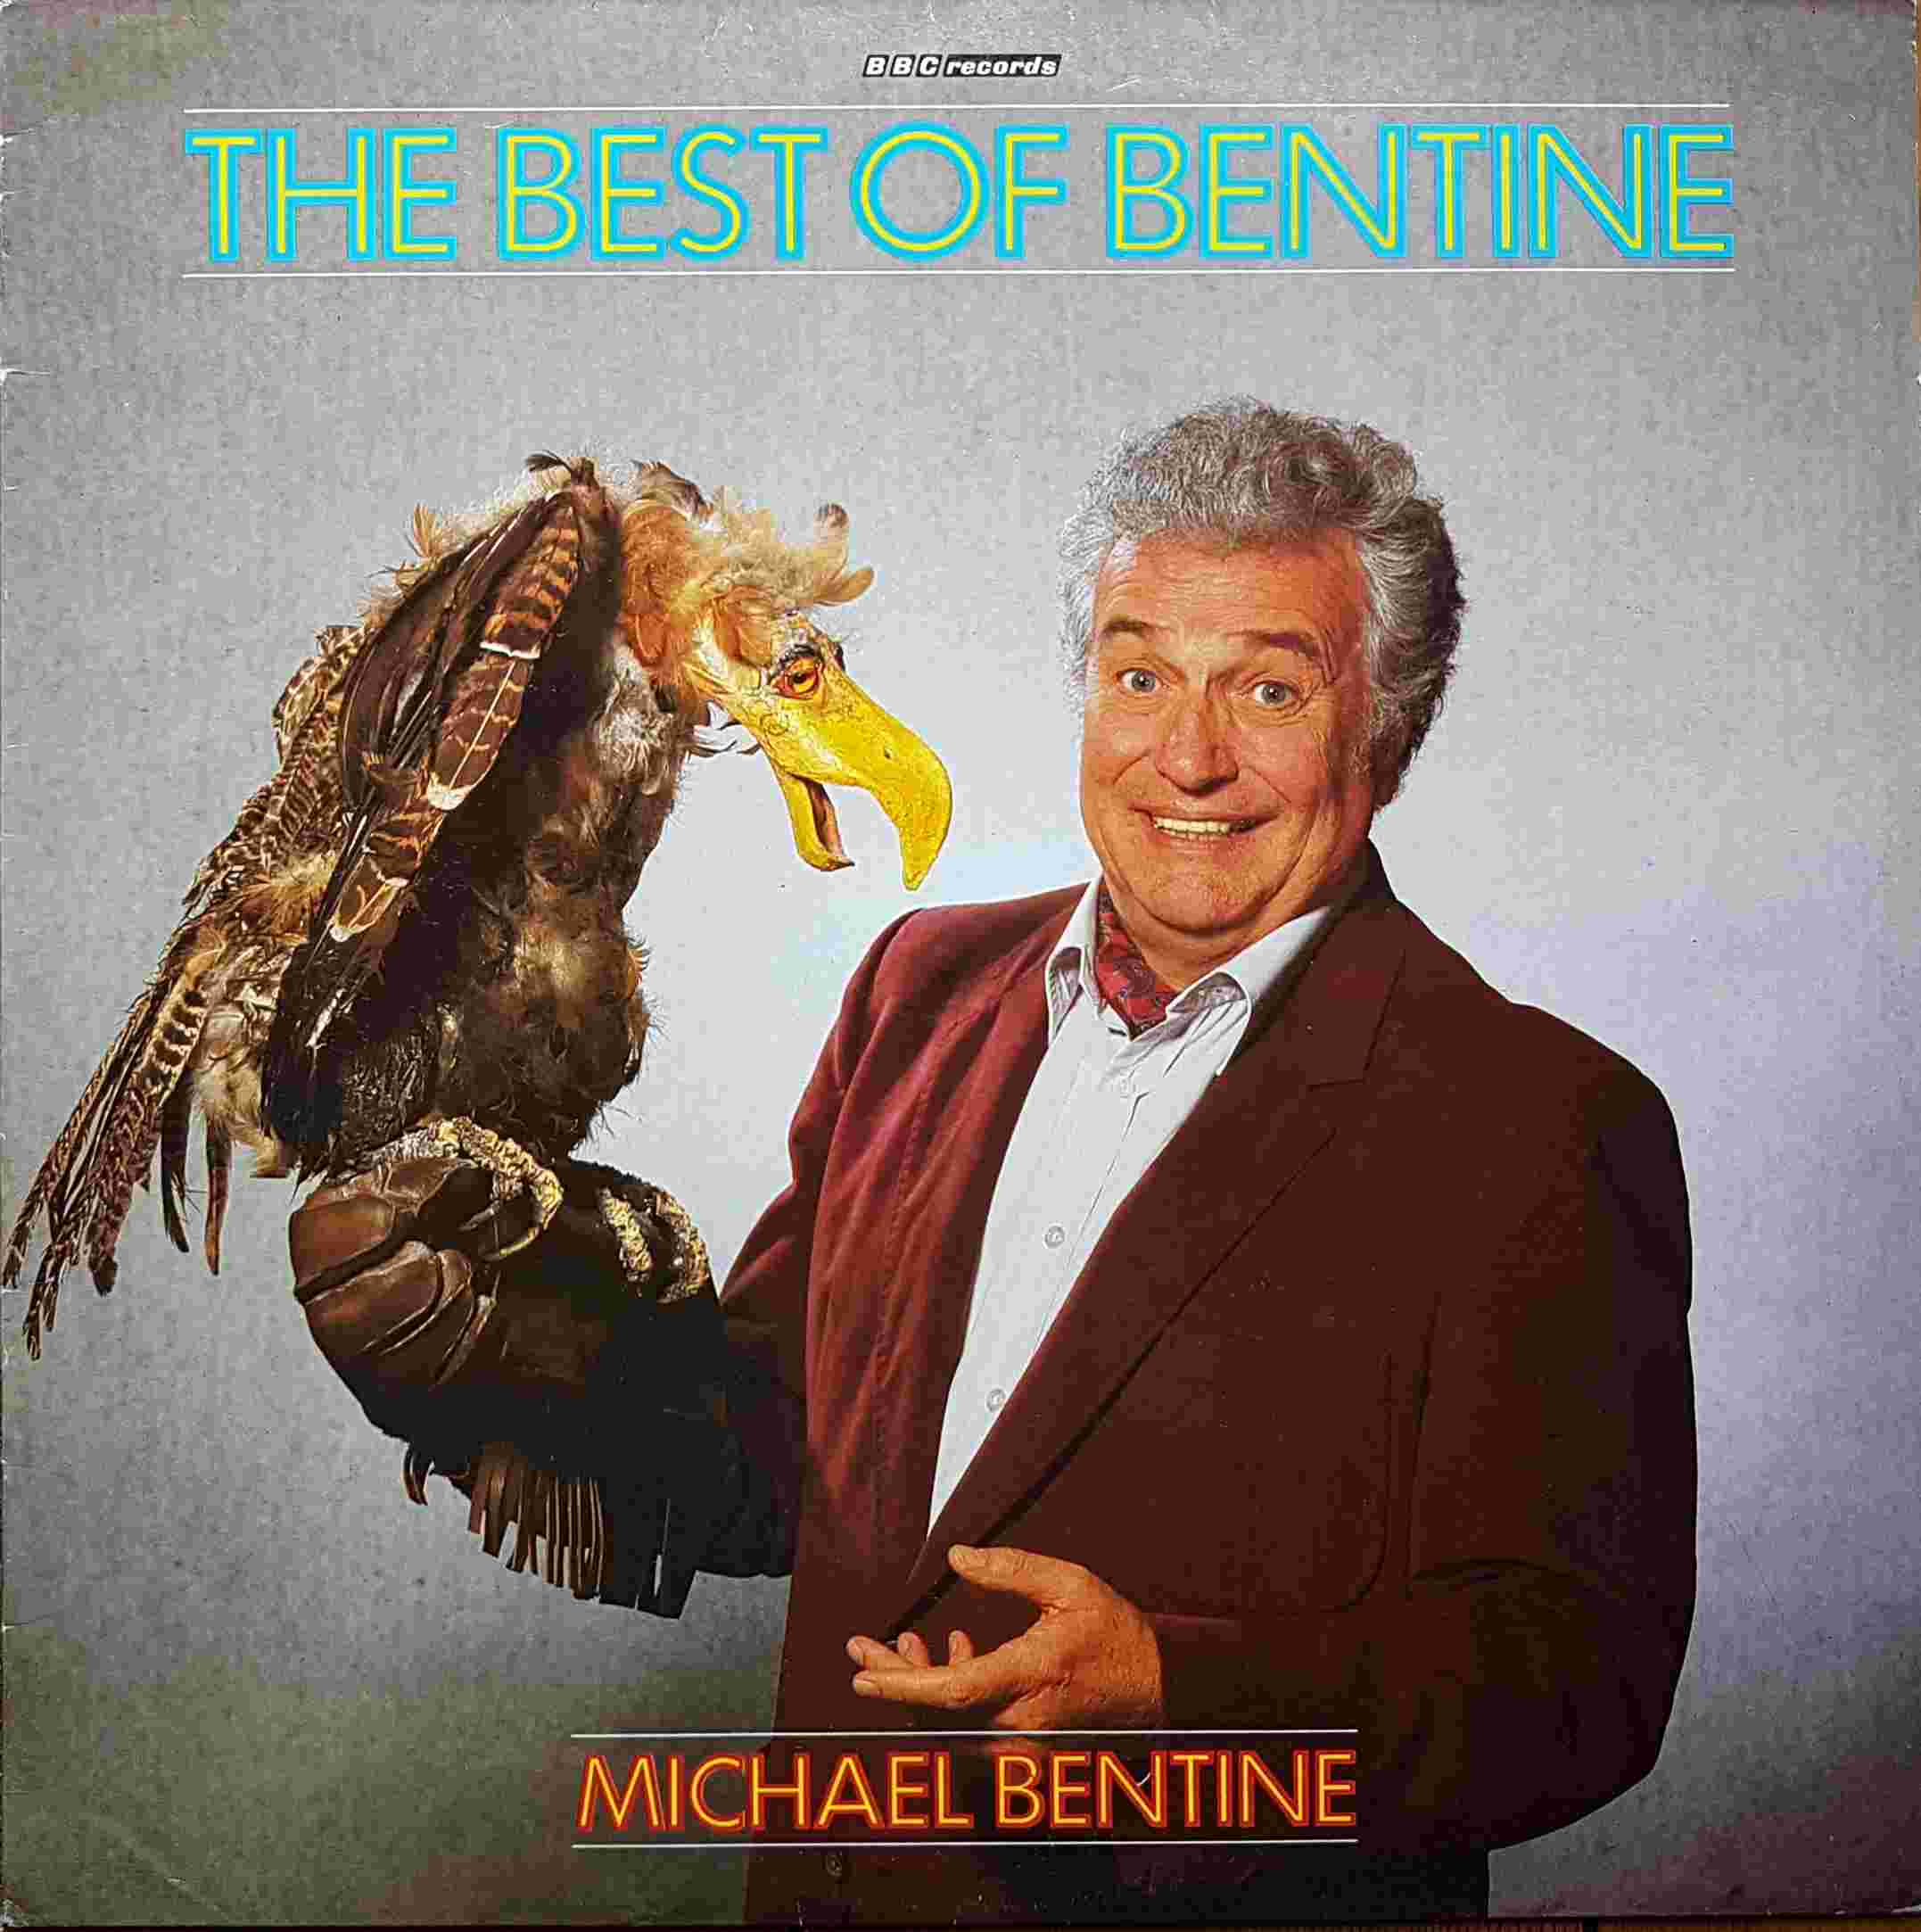 Picture of REH 492 Best of Bentine by artist Michael Bentine from the BBC albums - Records and Tapes library